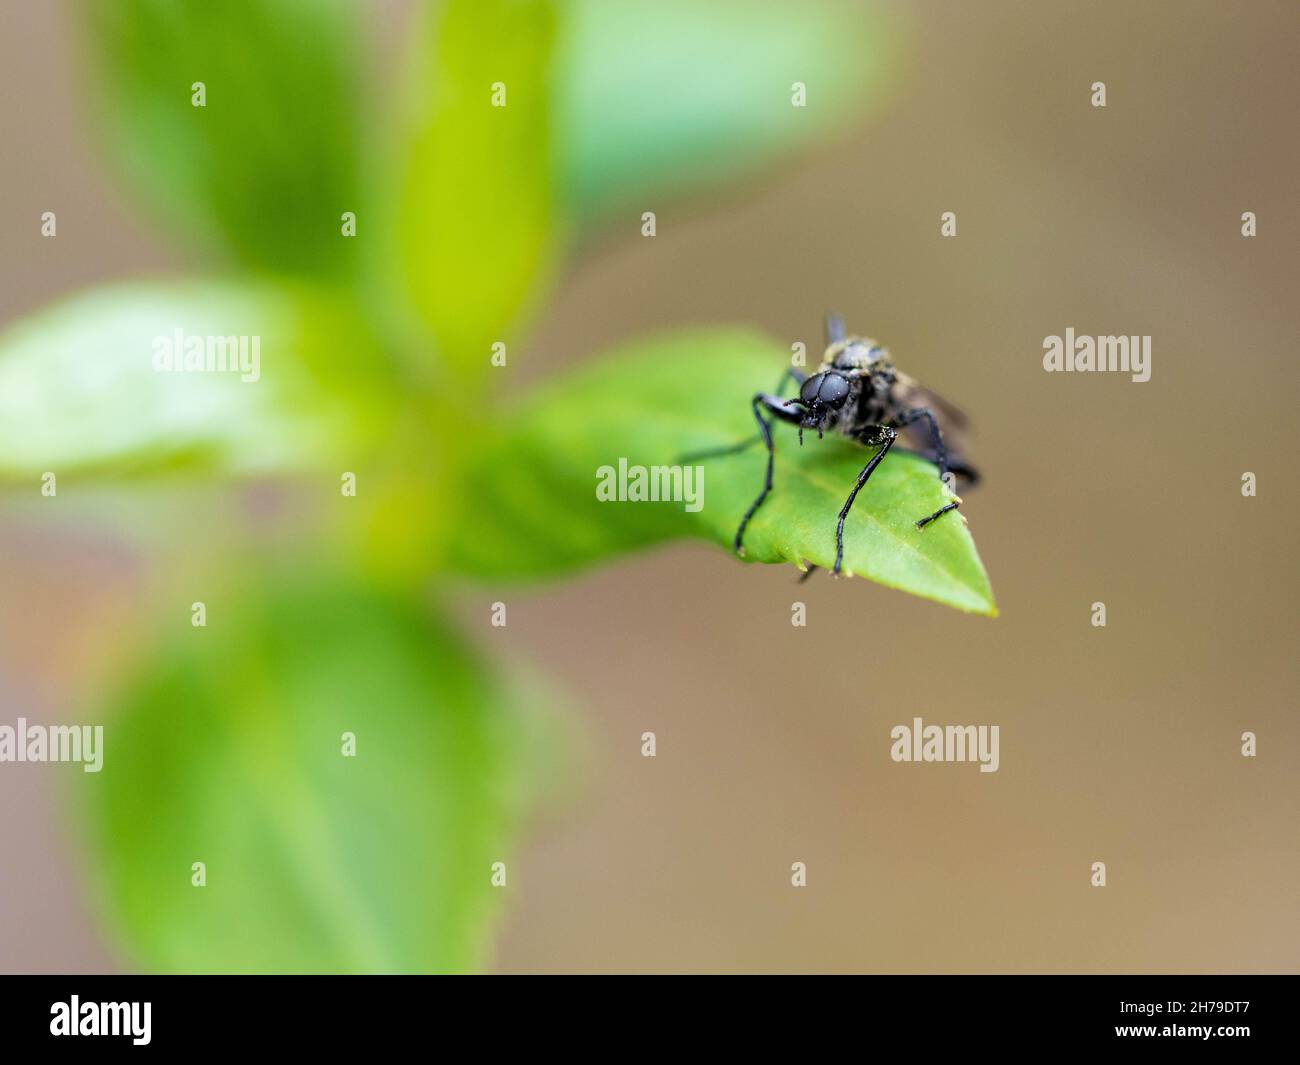 St. Mark's fly or hawthorn fly on green tree leaves Stock Photo